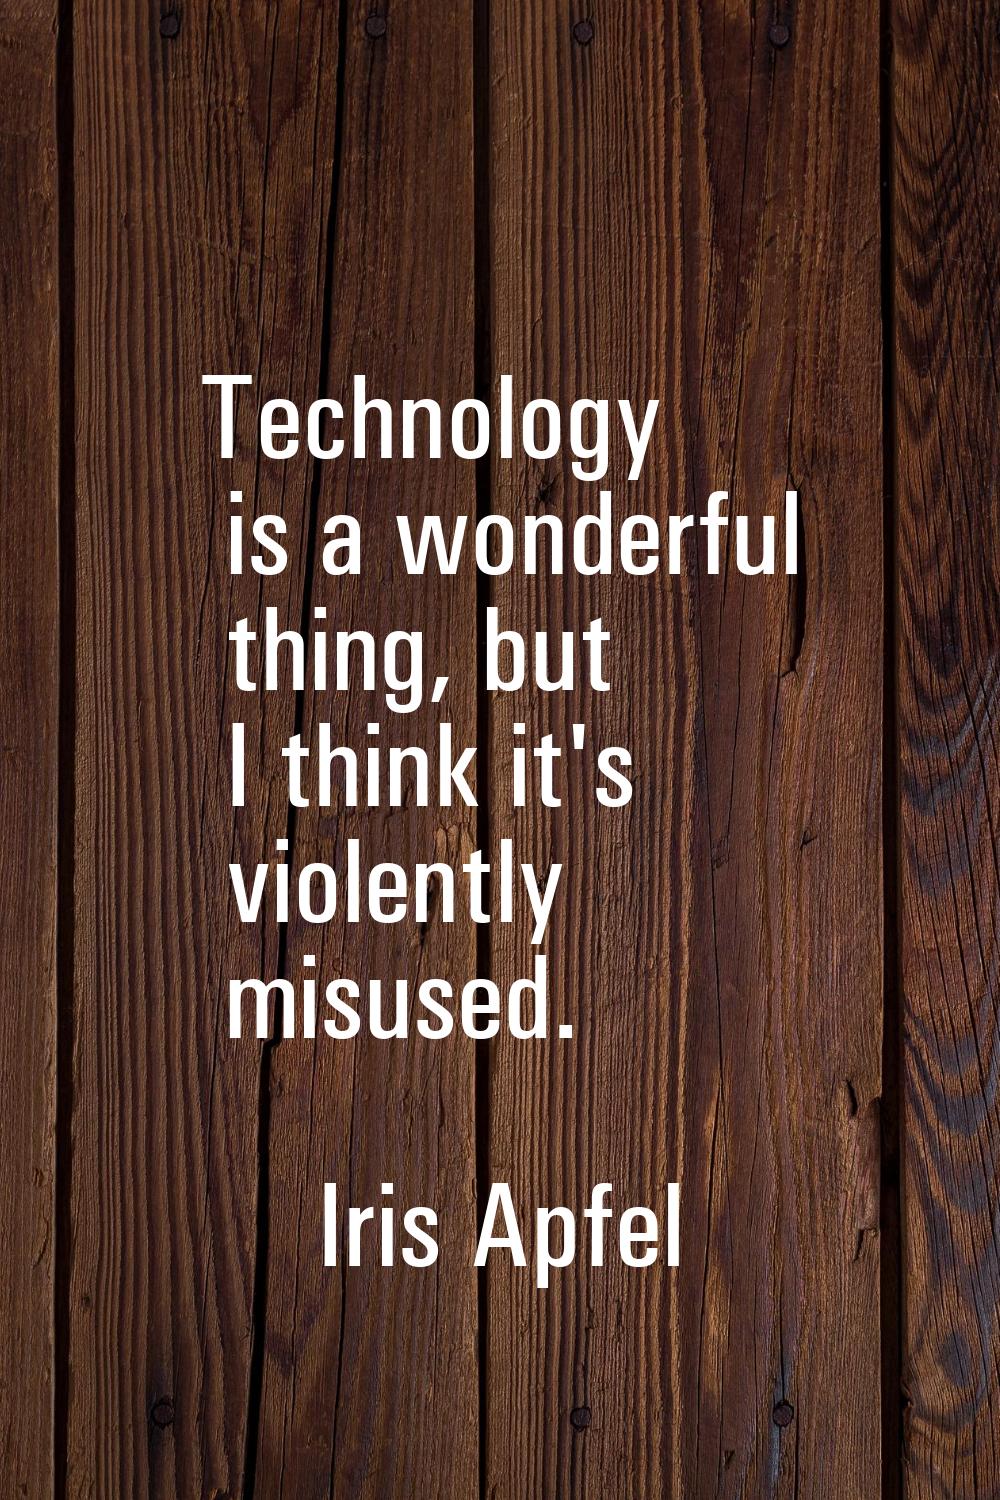 Technology is a wonderful thing, but I think it's violently misused.